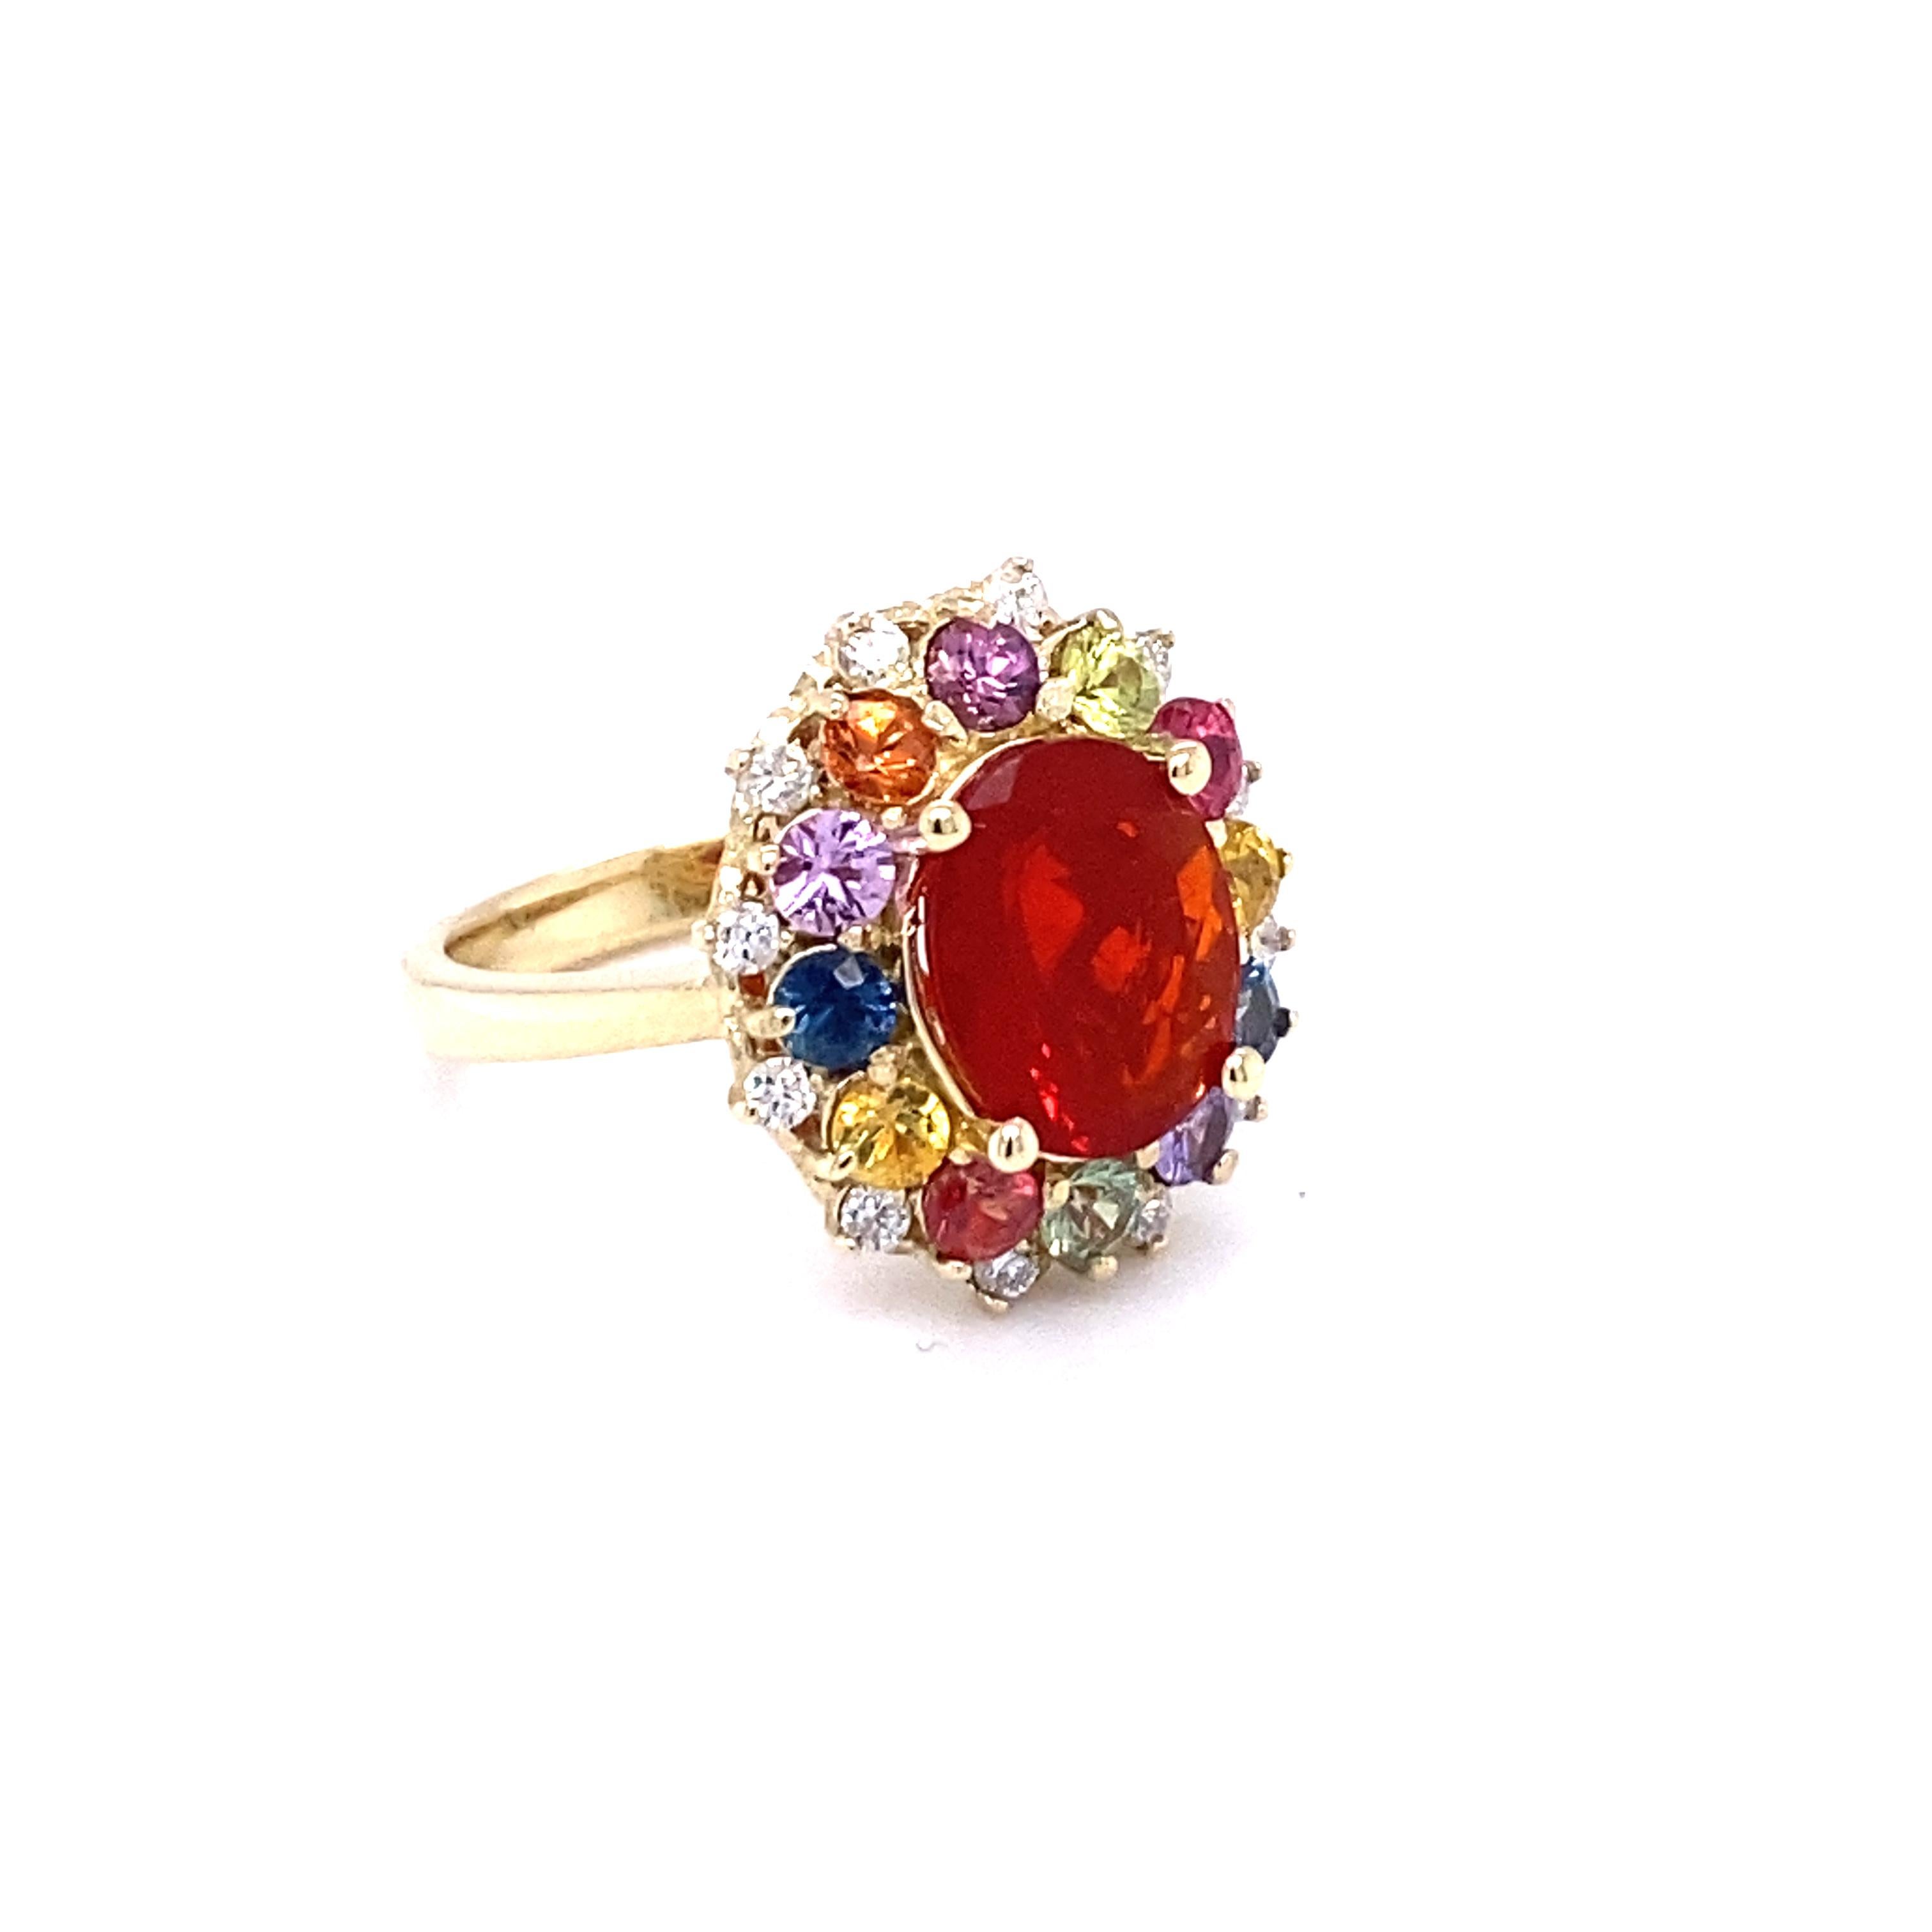 This Ring has a 2.06 carat Oval Cut Fire Opal as its center stone and is beautifully surrounded by 12 Multi-Colored Sapphires that weigh 1.52 Carats and 12 Round Cut Diamonds that weigh 0.26 carats (Clarity: SI2, Color: F)

The Total Carat Weight of